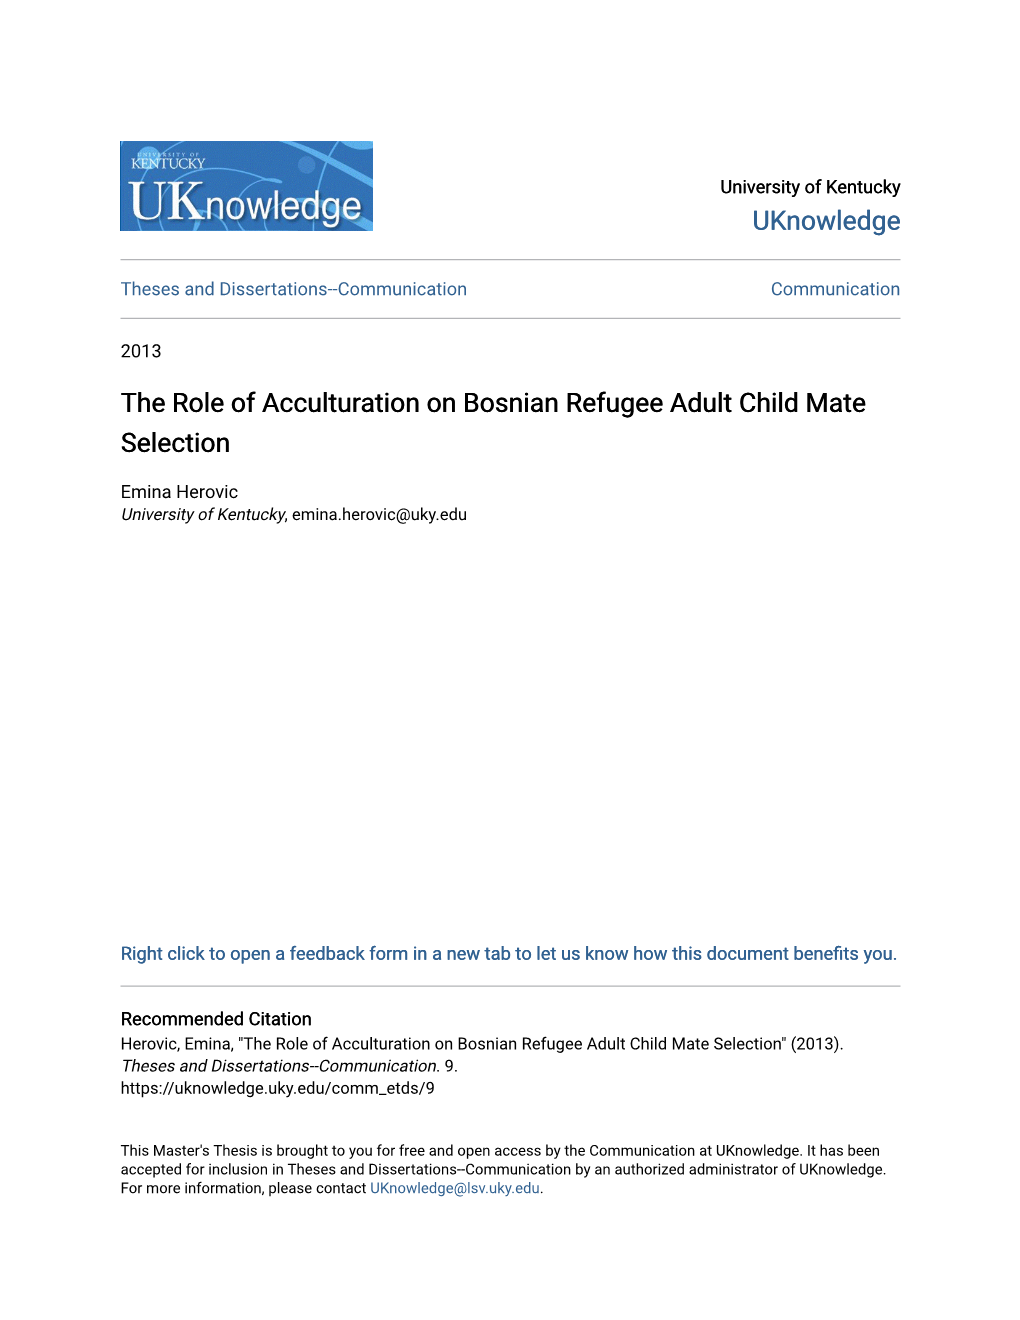 The Role of Acculturation on Bosnian Refugee Adult Child Mate Selection